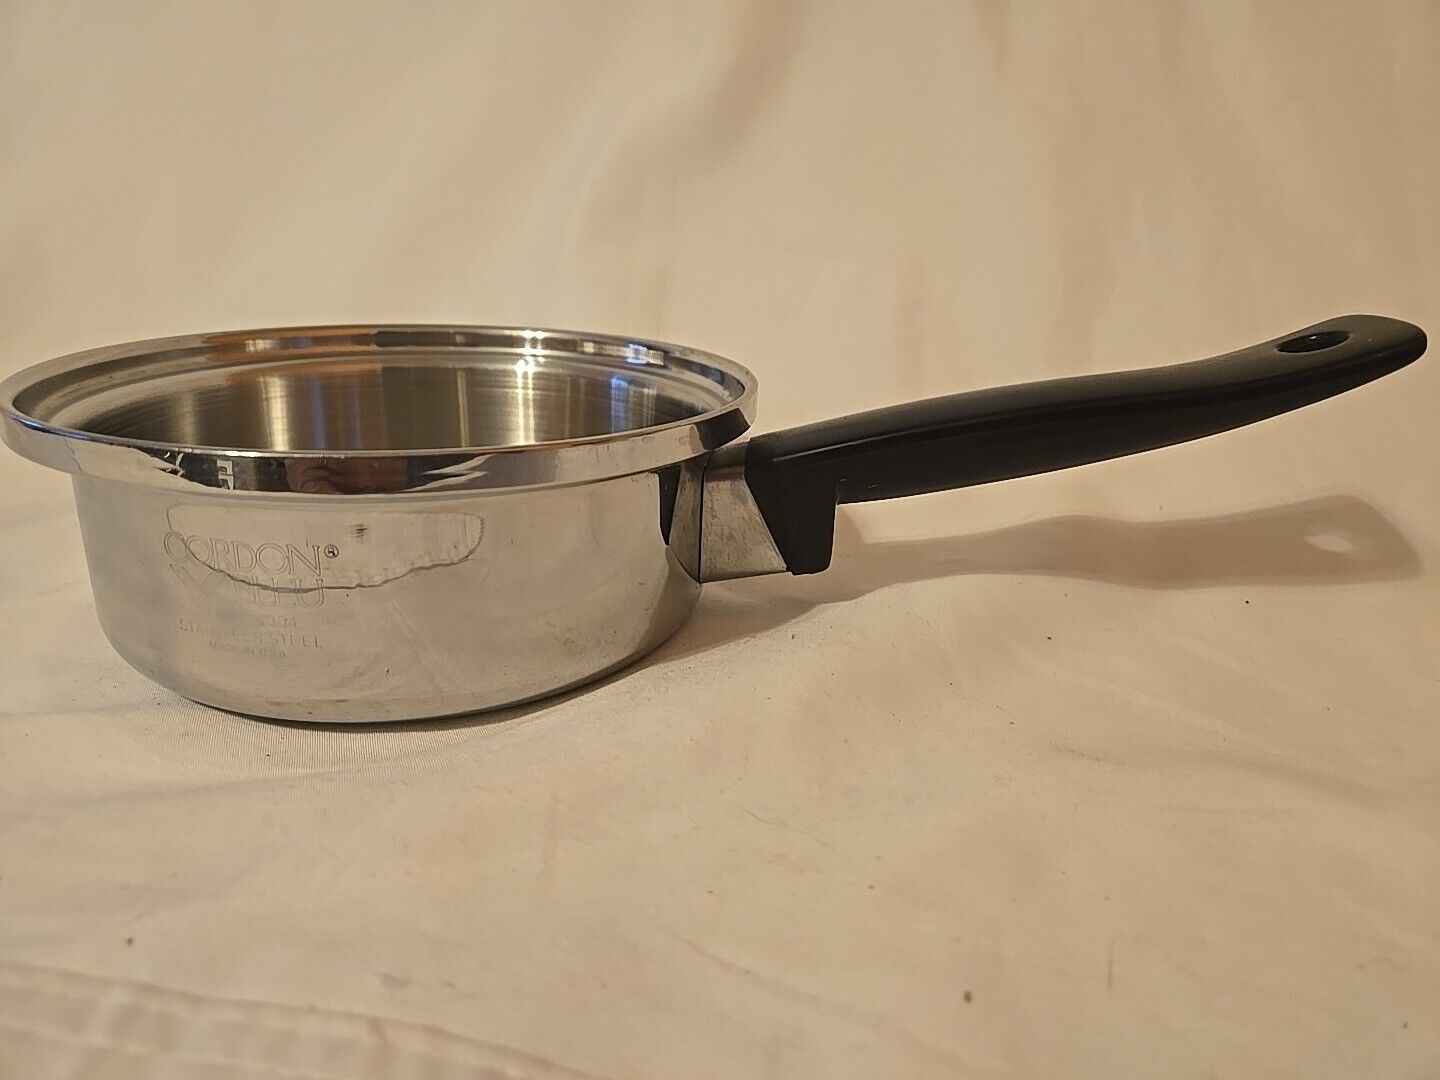  Cordon Bleu 7 PLY T304 Stainless Steel 7” Sauce Pan Made In USA